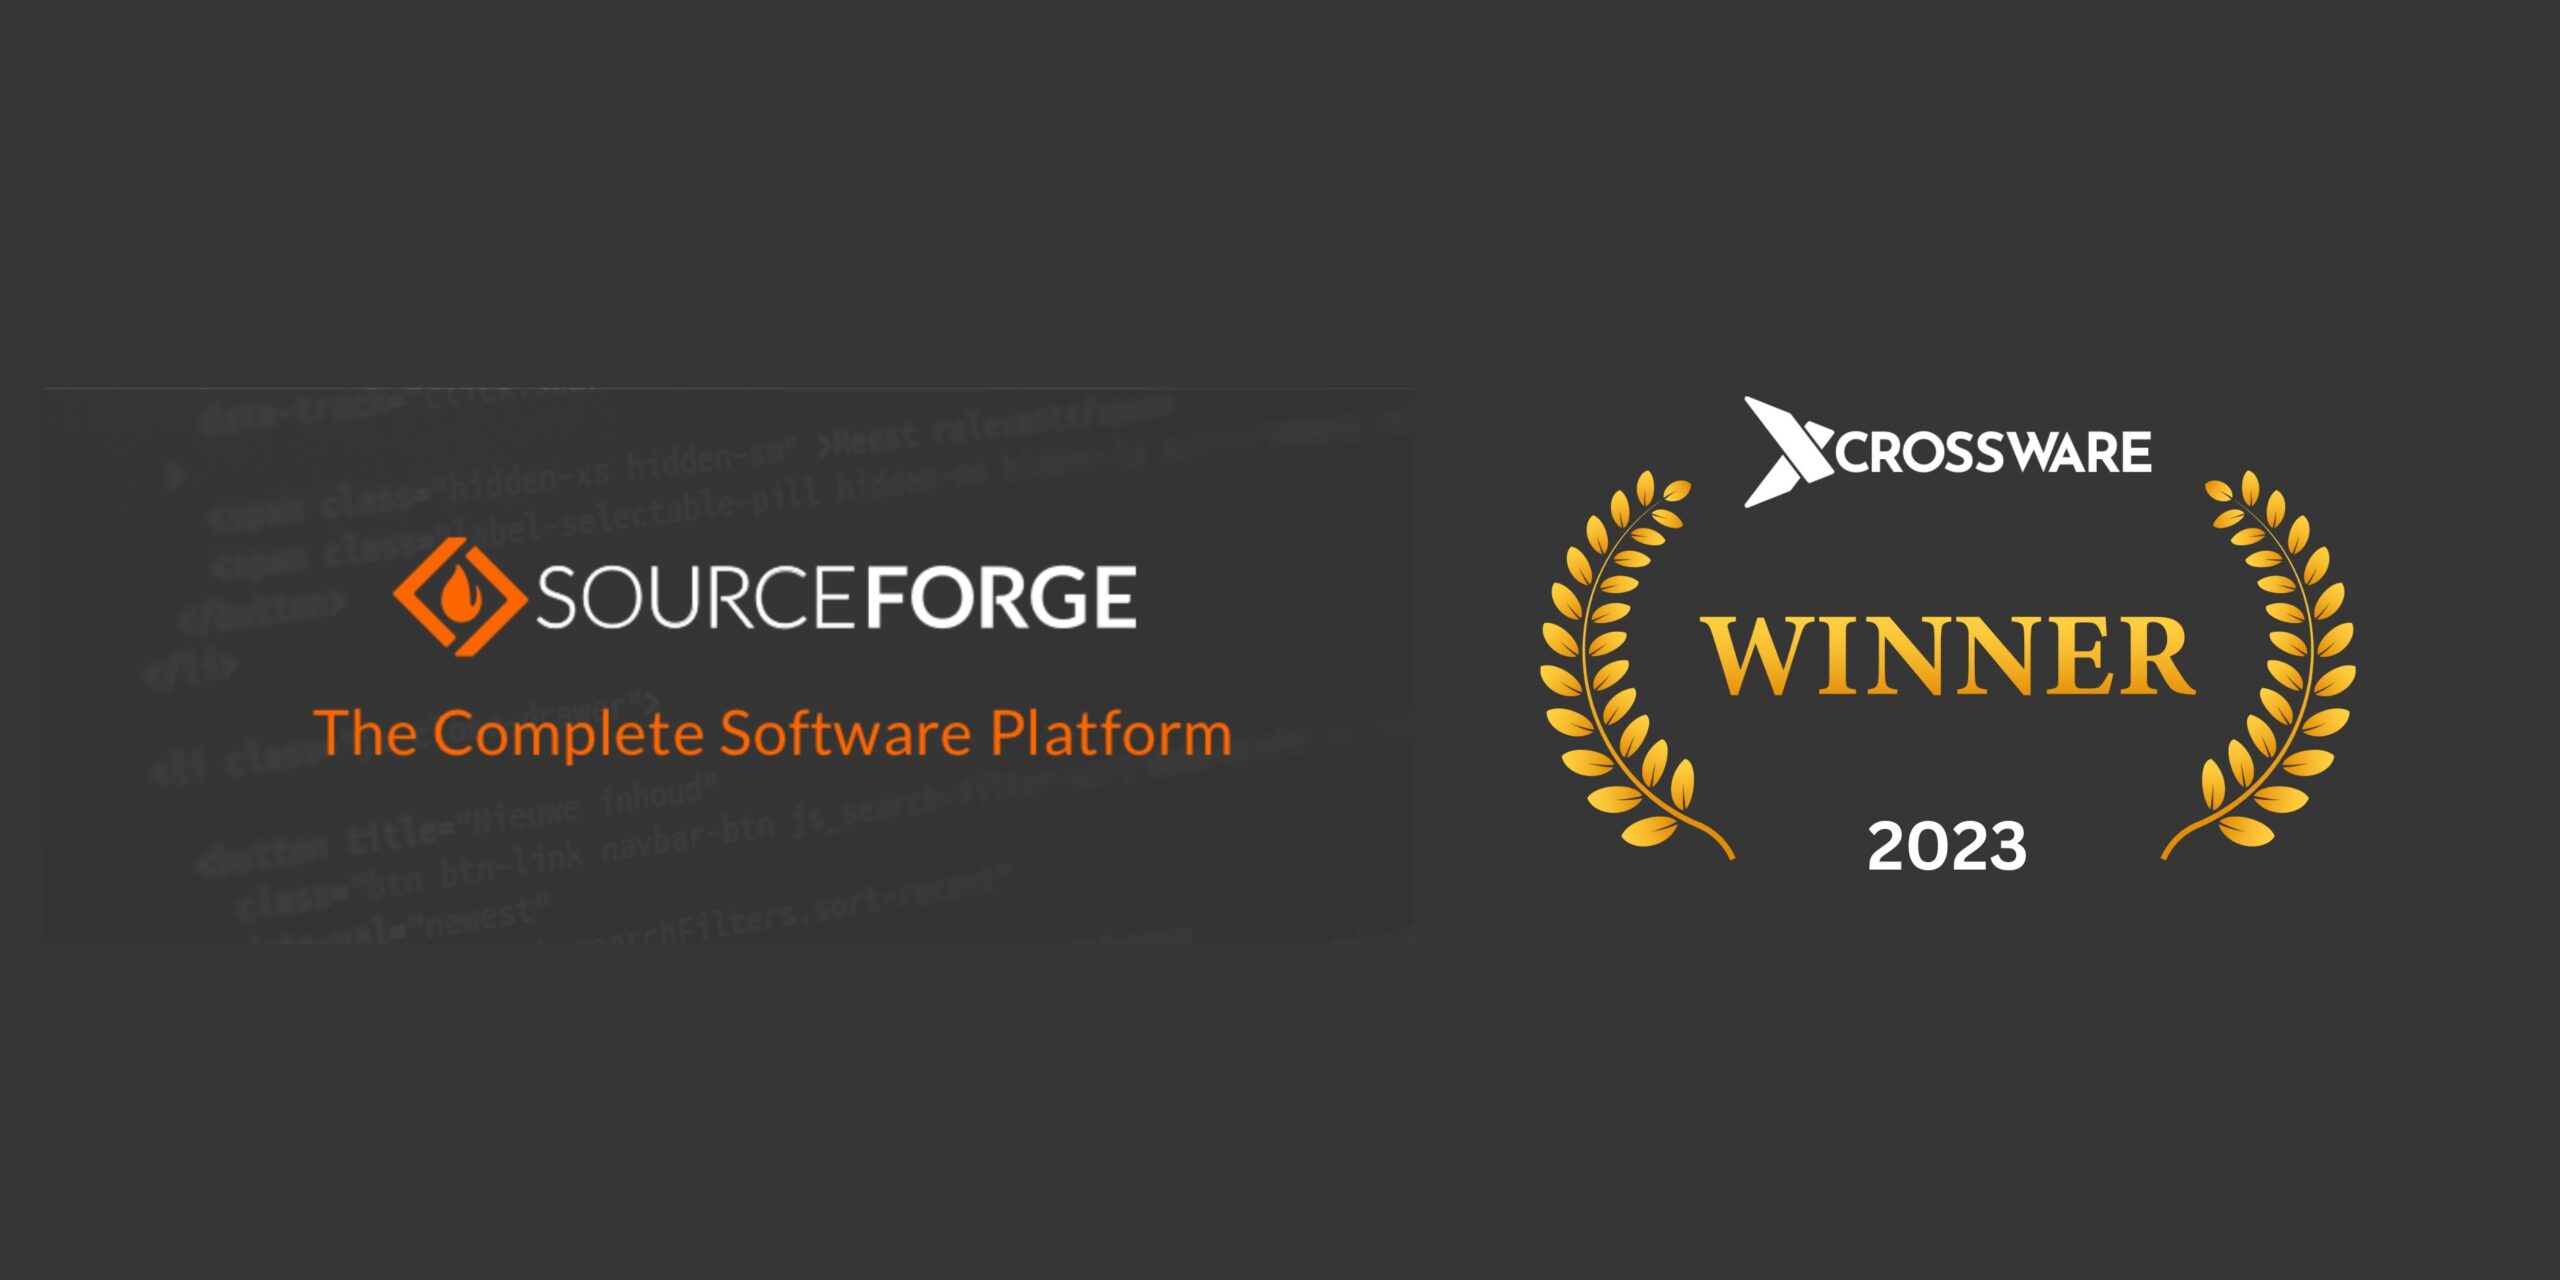 Crossware wins Summer 2023 Top Performer Award from SourceForge